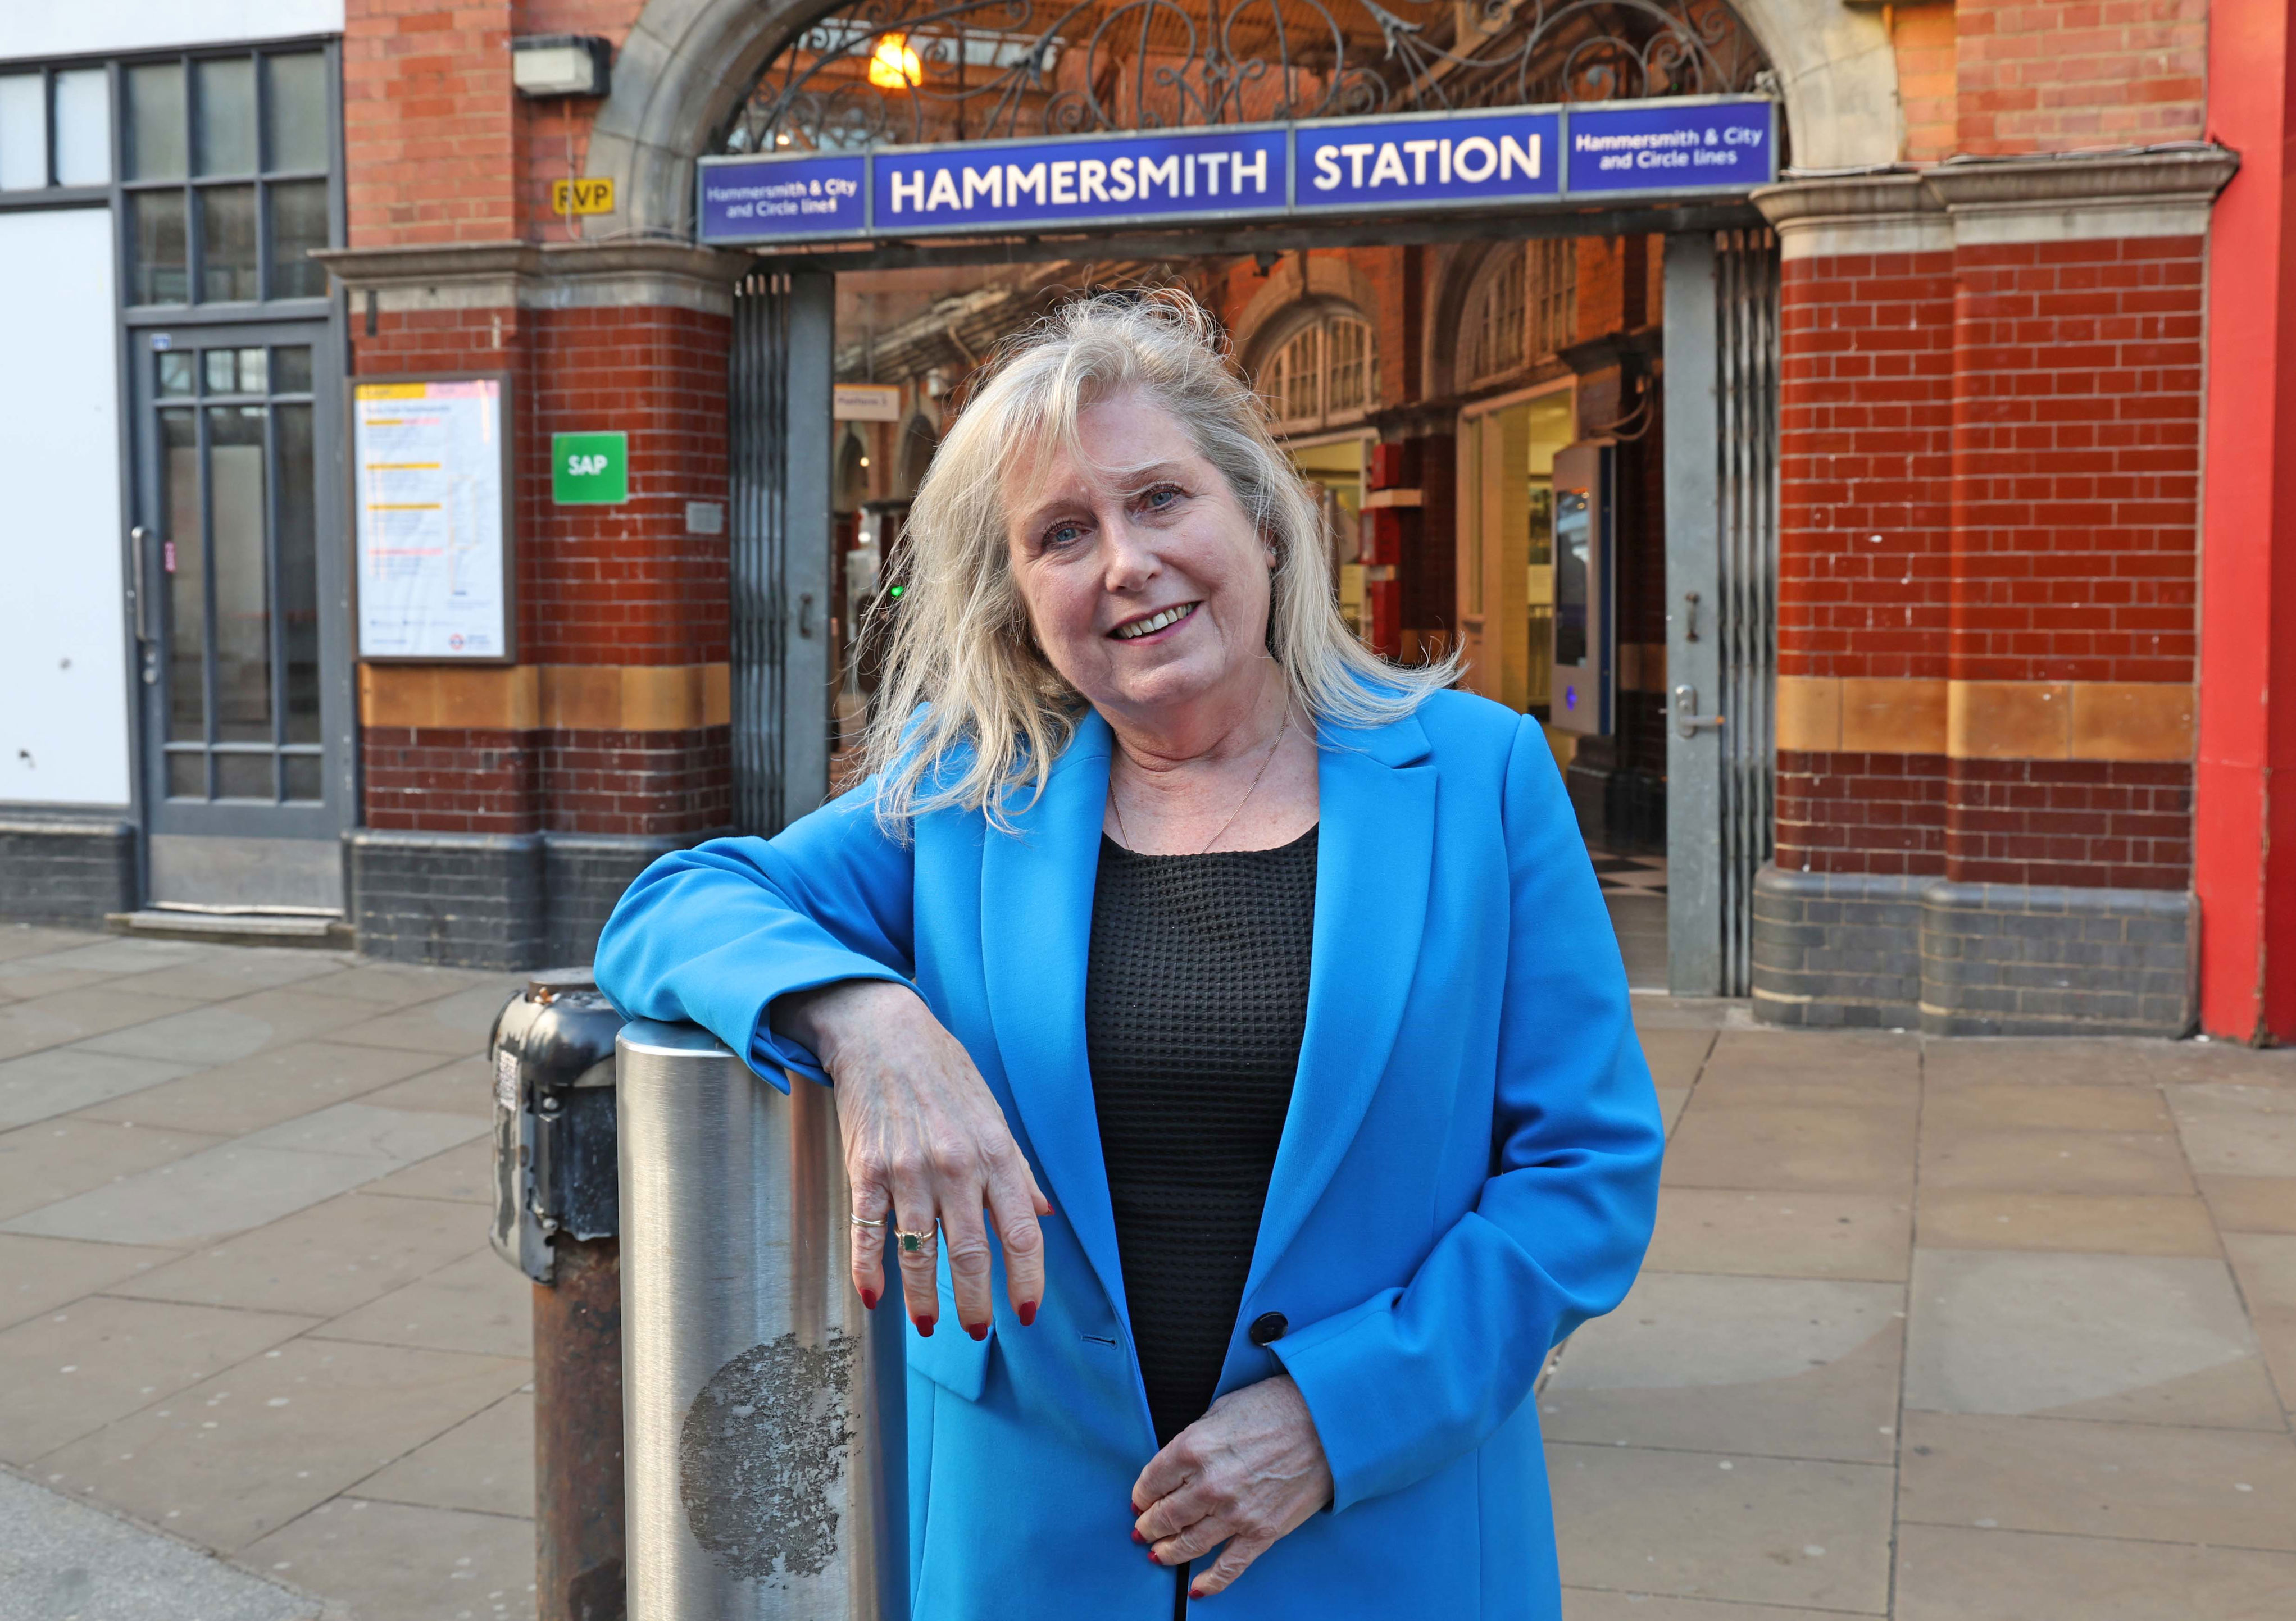 london mayoral election: i'll expand night tube to help women get home safely, vows tory candidate susan hall